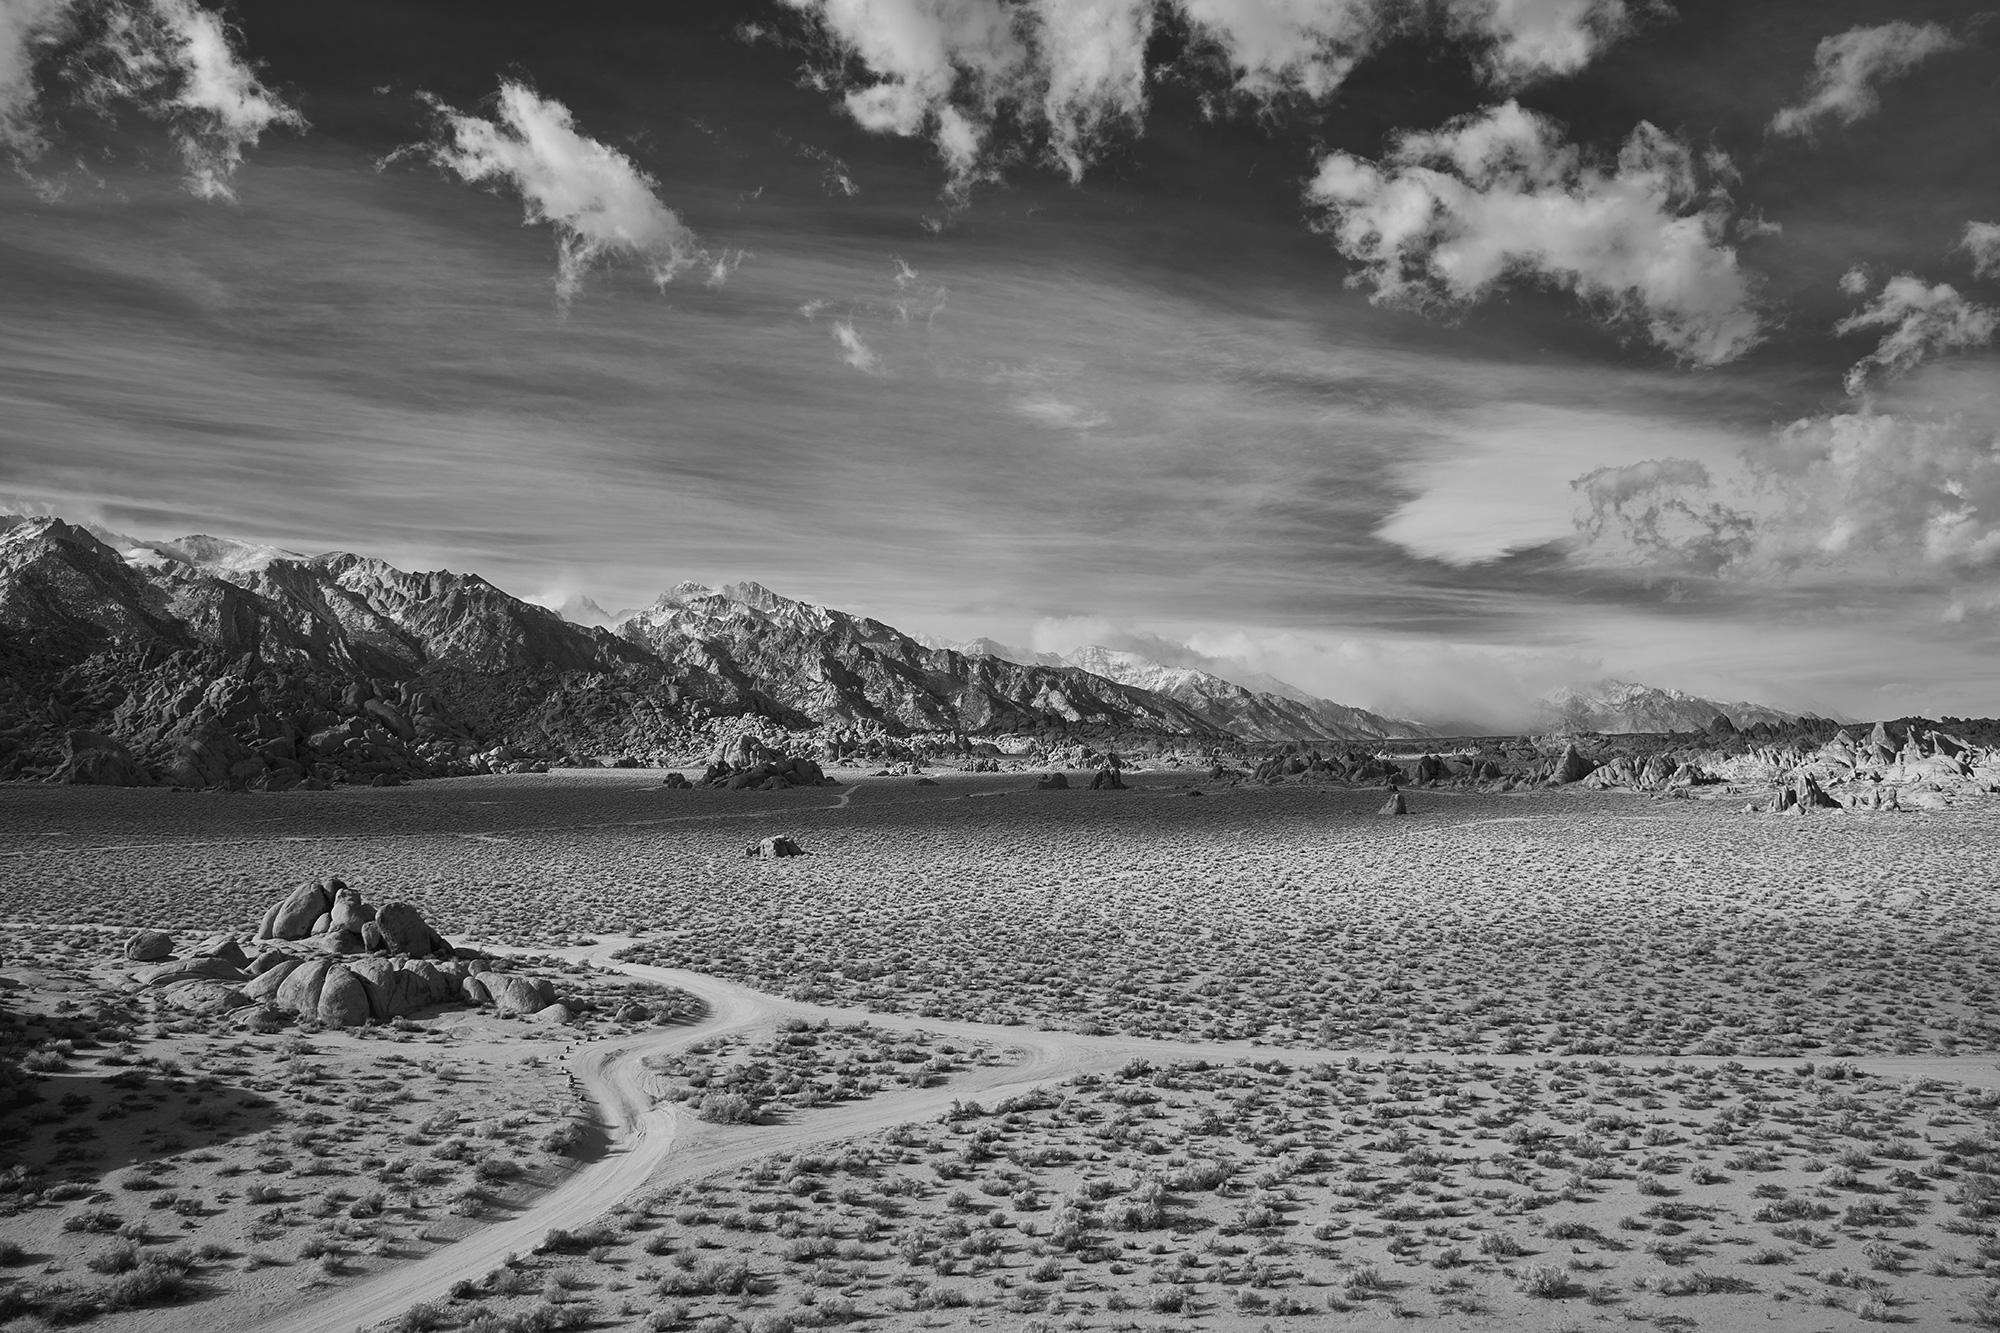 Desert Crossing - large scale black and white photo of dramatic desert landscape - Photograph by Frank Schott